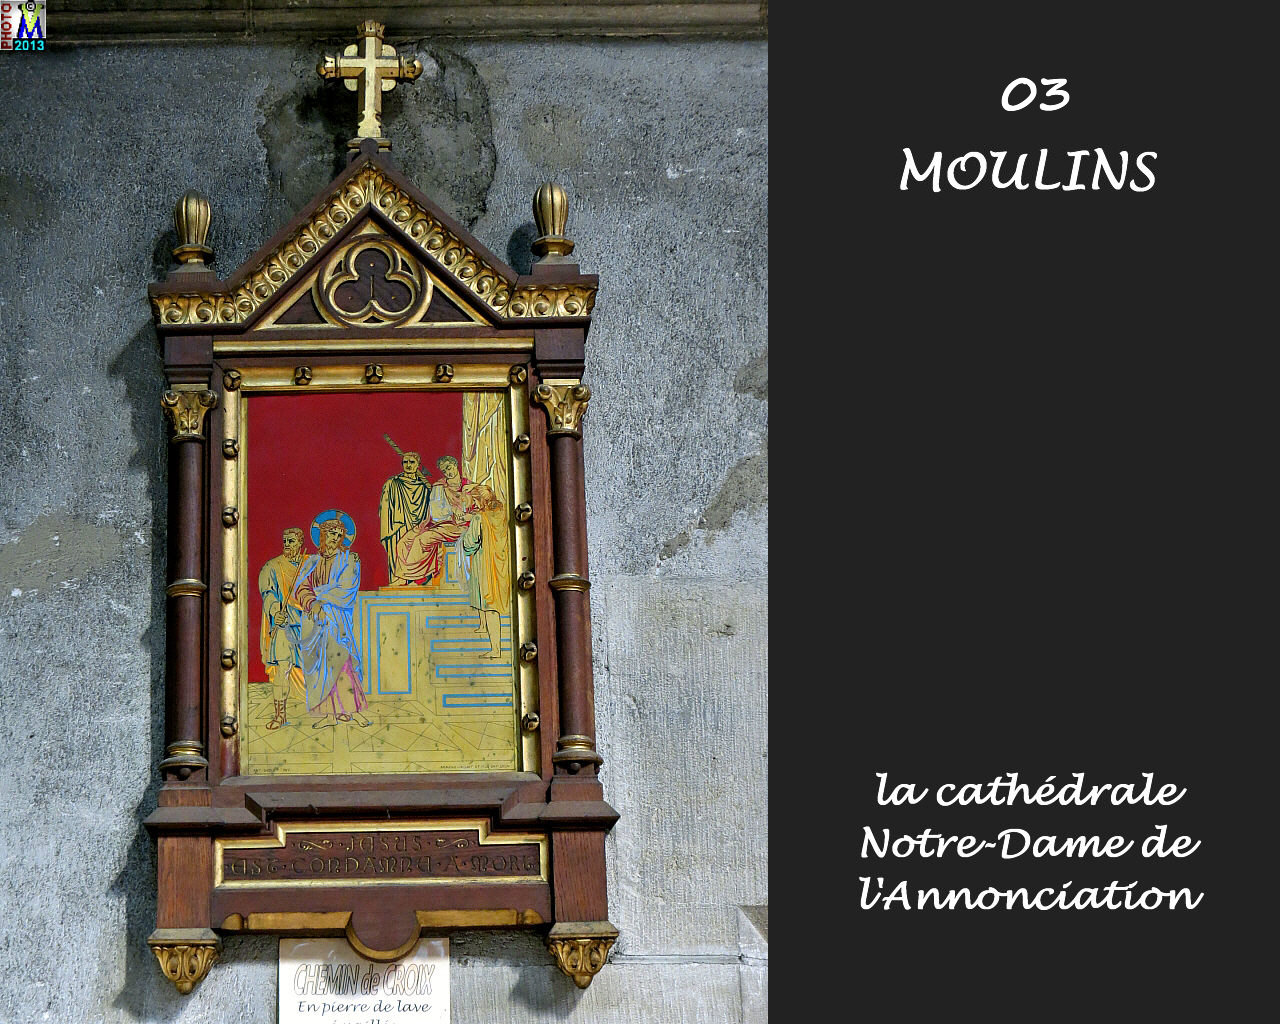 03MOULINS_cathedrale_280.jpg